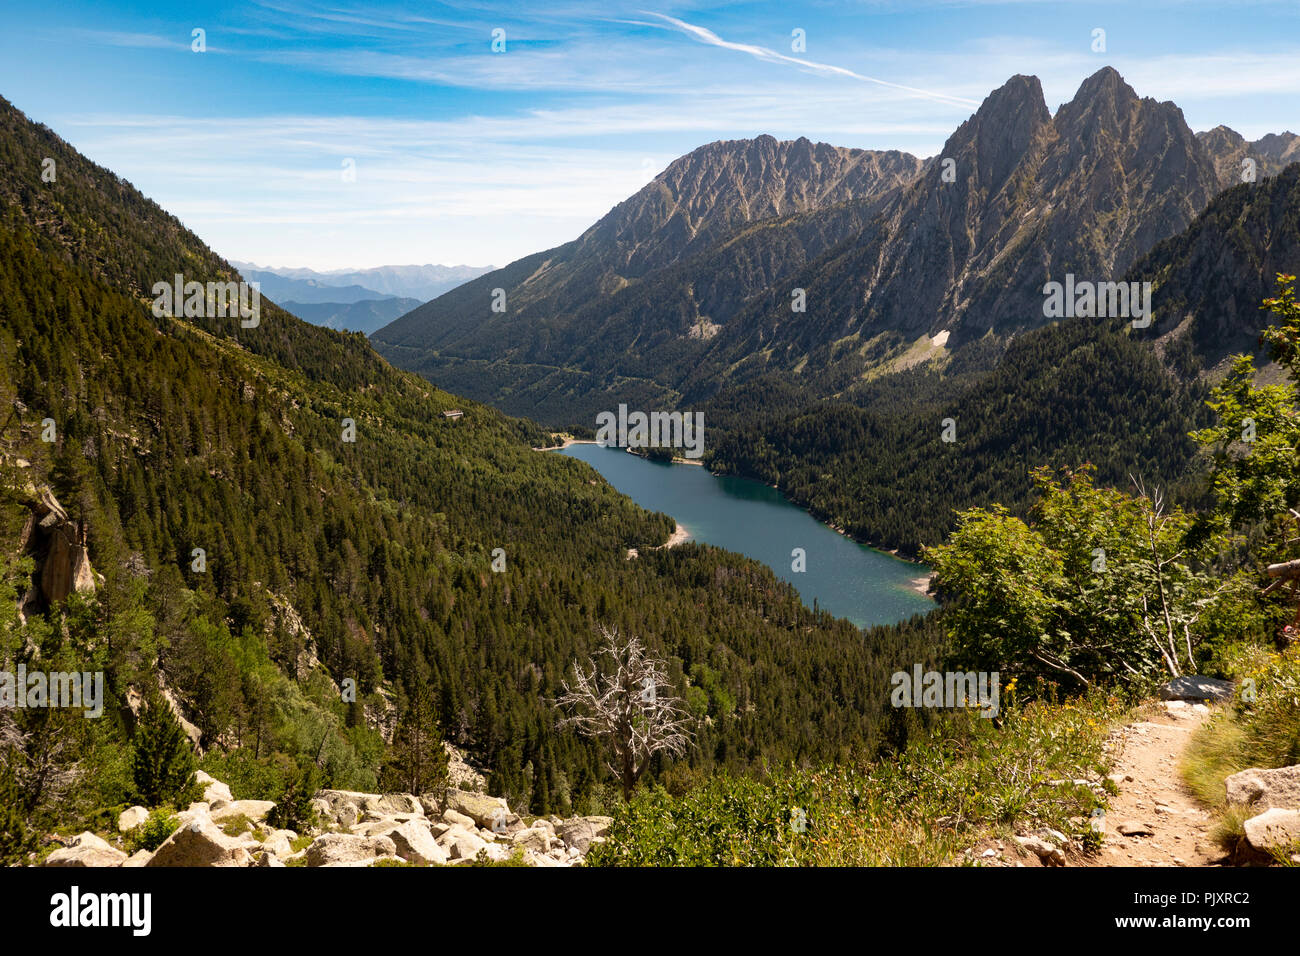 National Park Aiguestortes in Pyrenees Mountains, Catalonia, Spain. Stock Photo